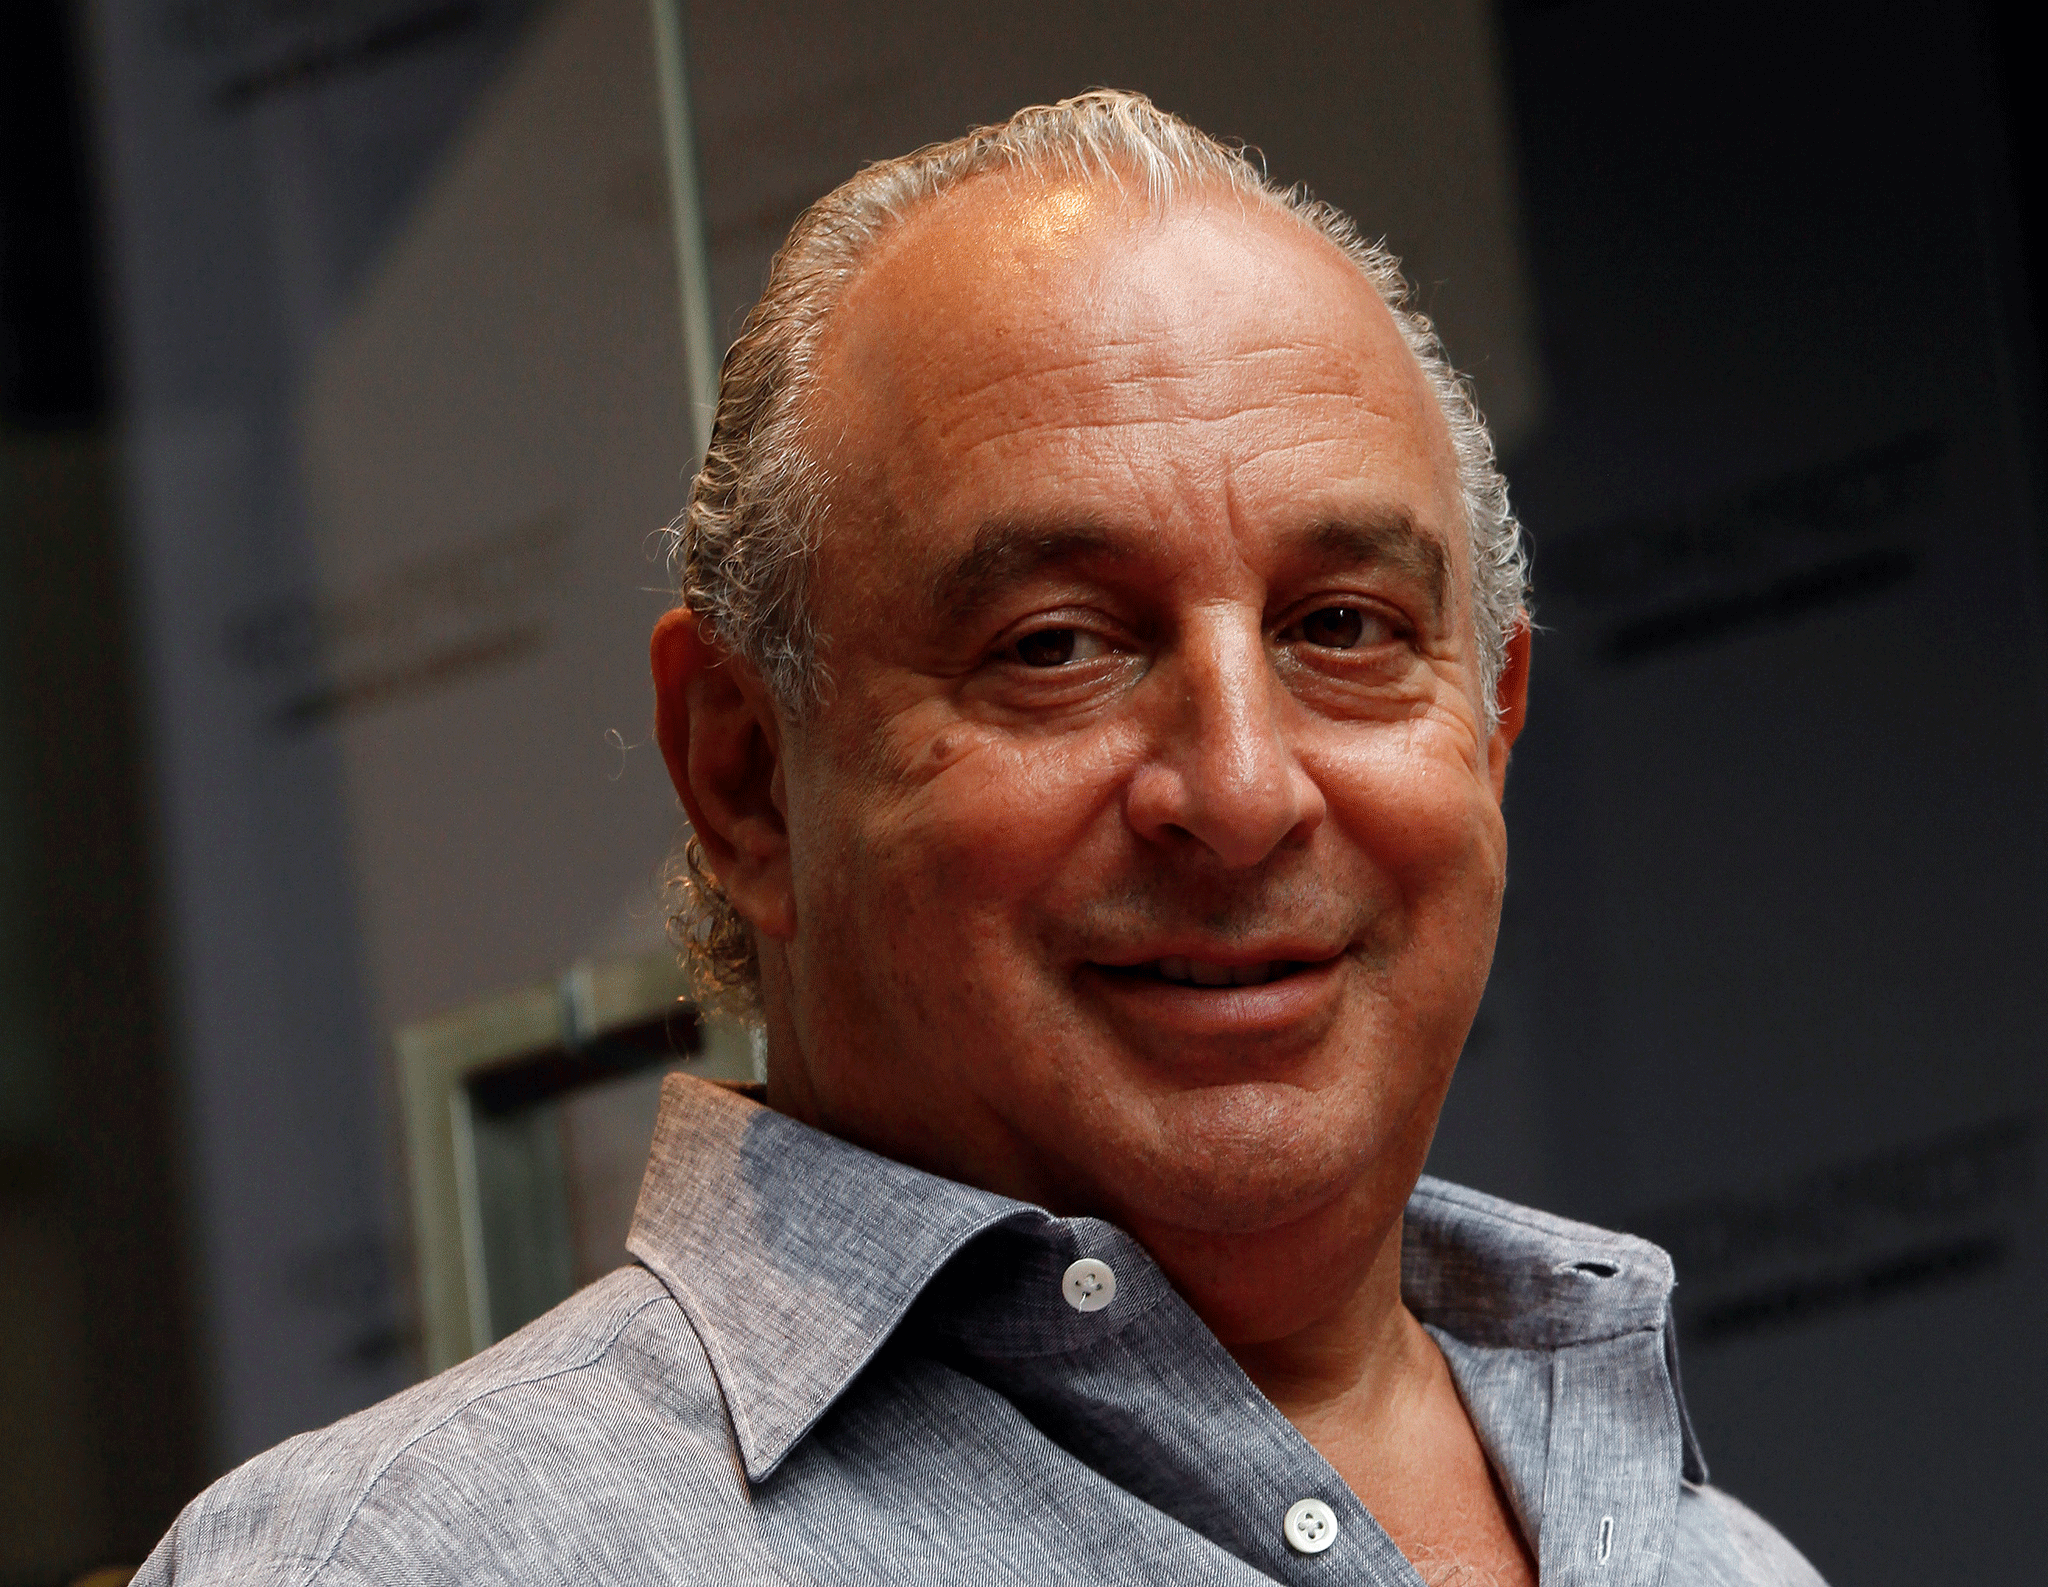 Sir Philip Green says he is ‘sad and very sorry’ over BHS collapse 